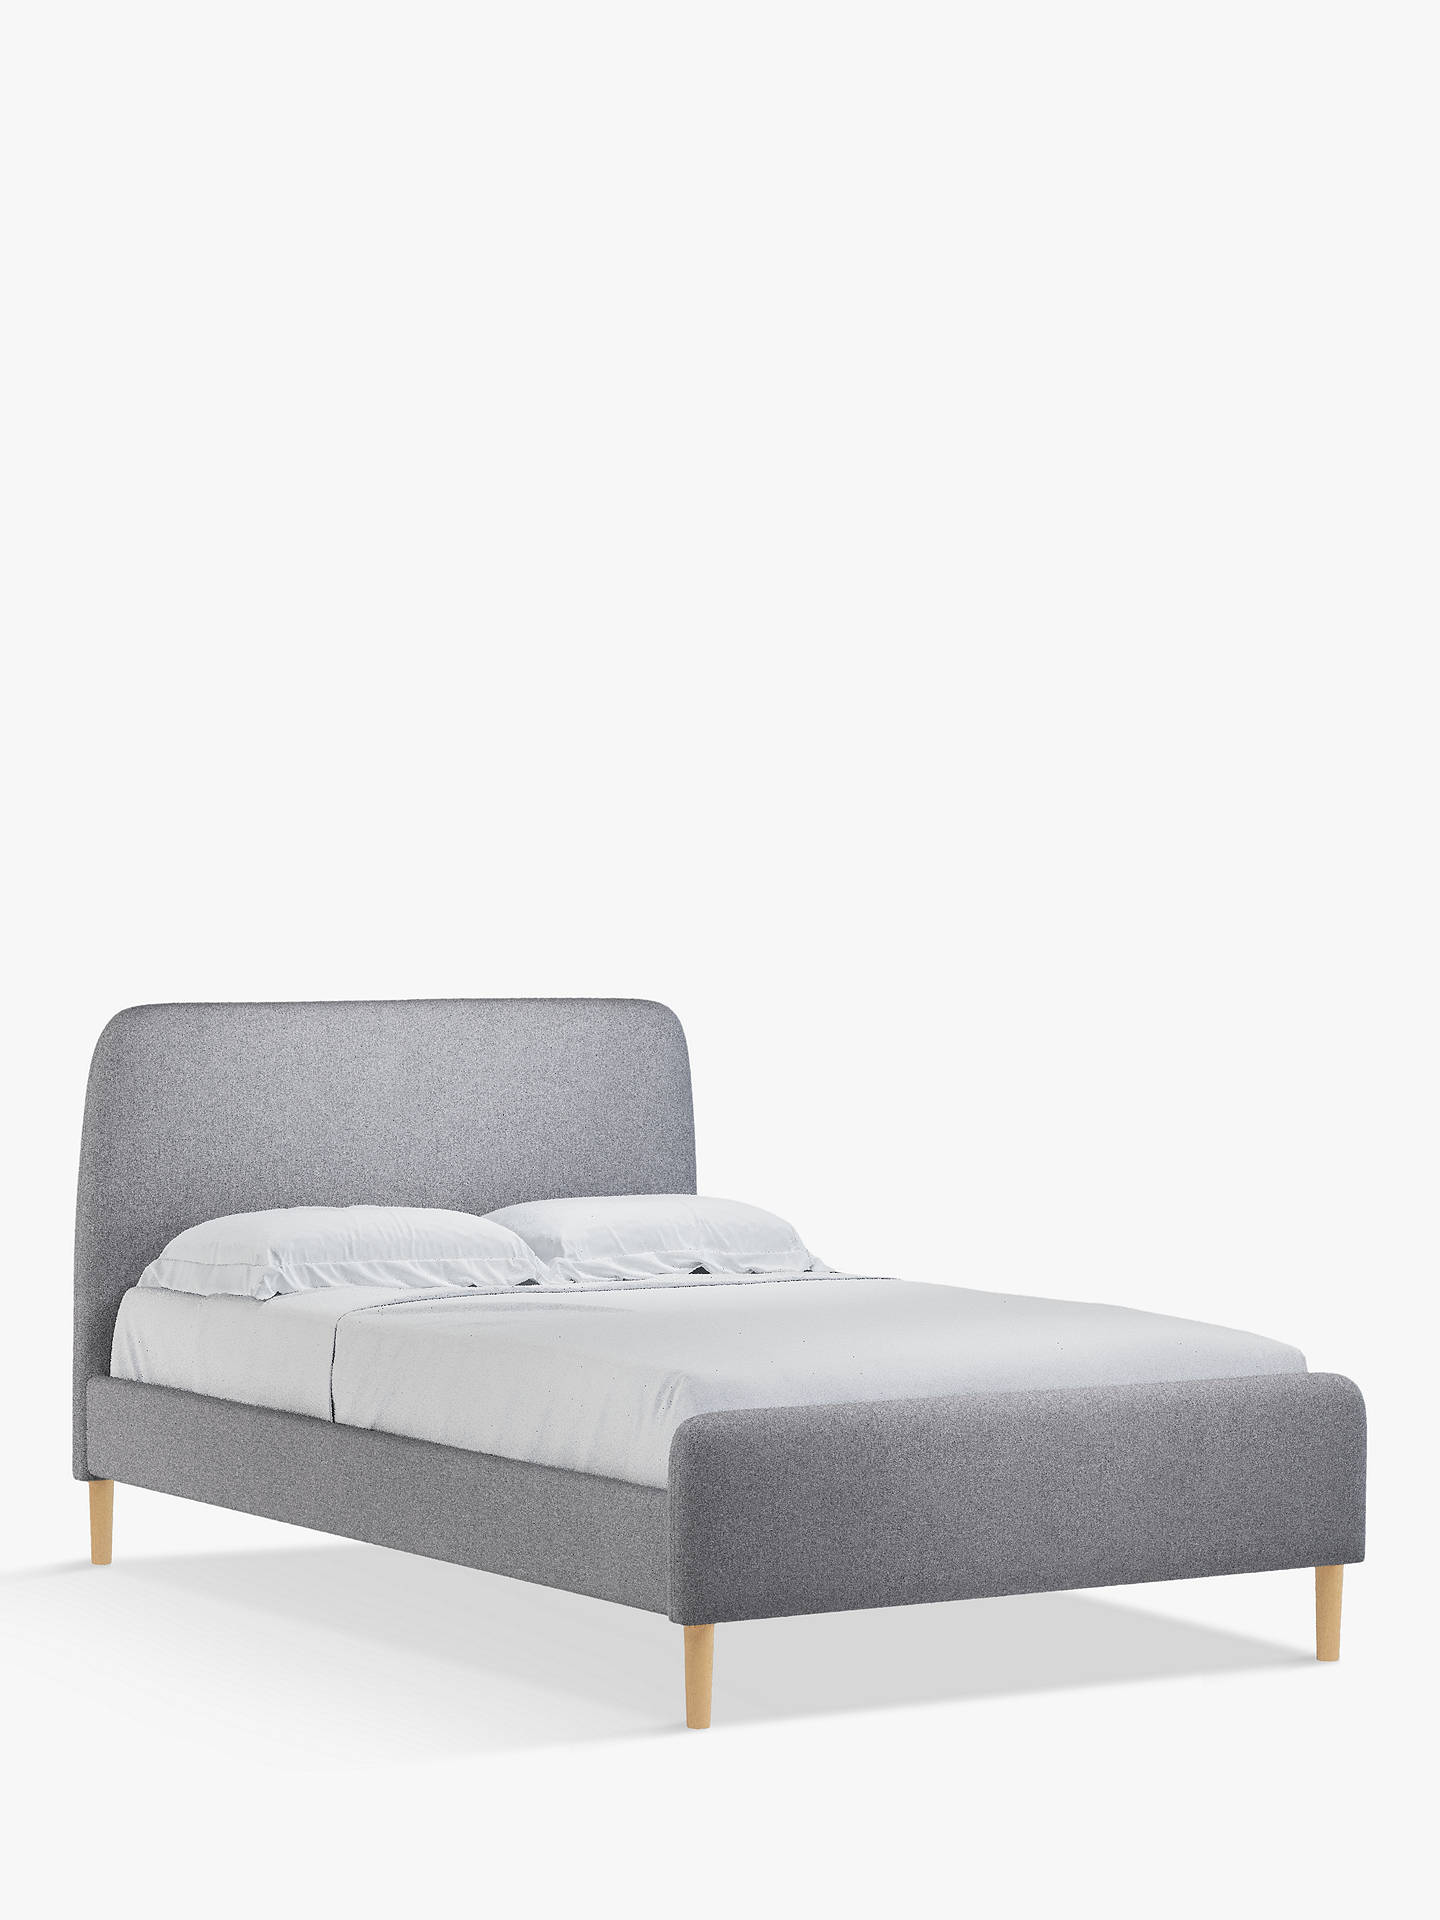 House by John Lewis Bonn Upholstered Bed Frame, Small Double, Saga Grey at John Lewis & Partners